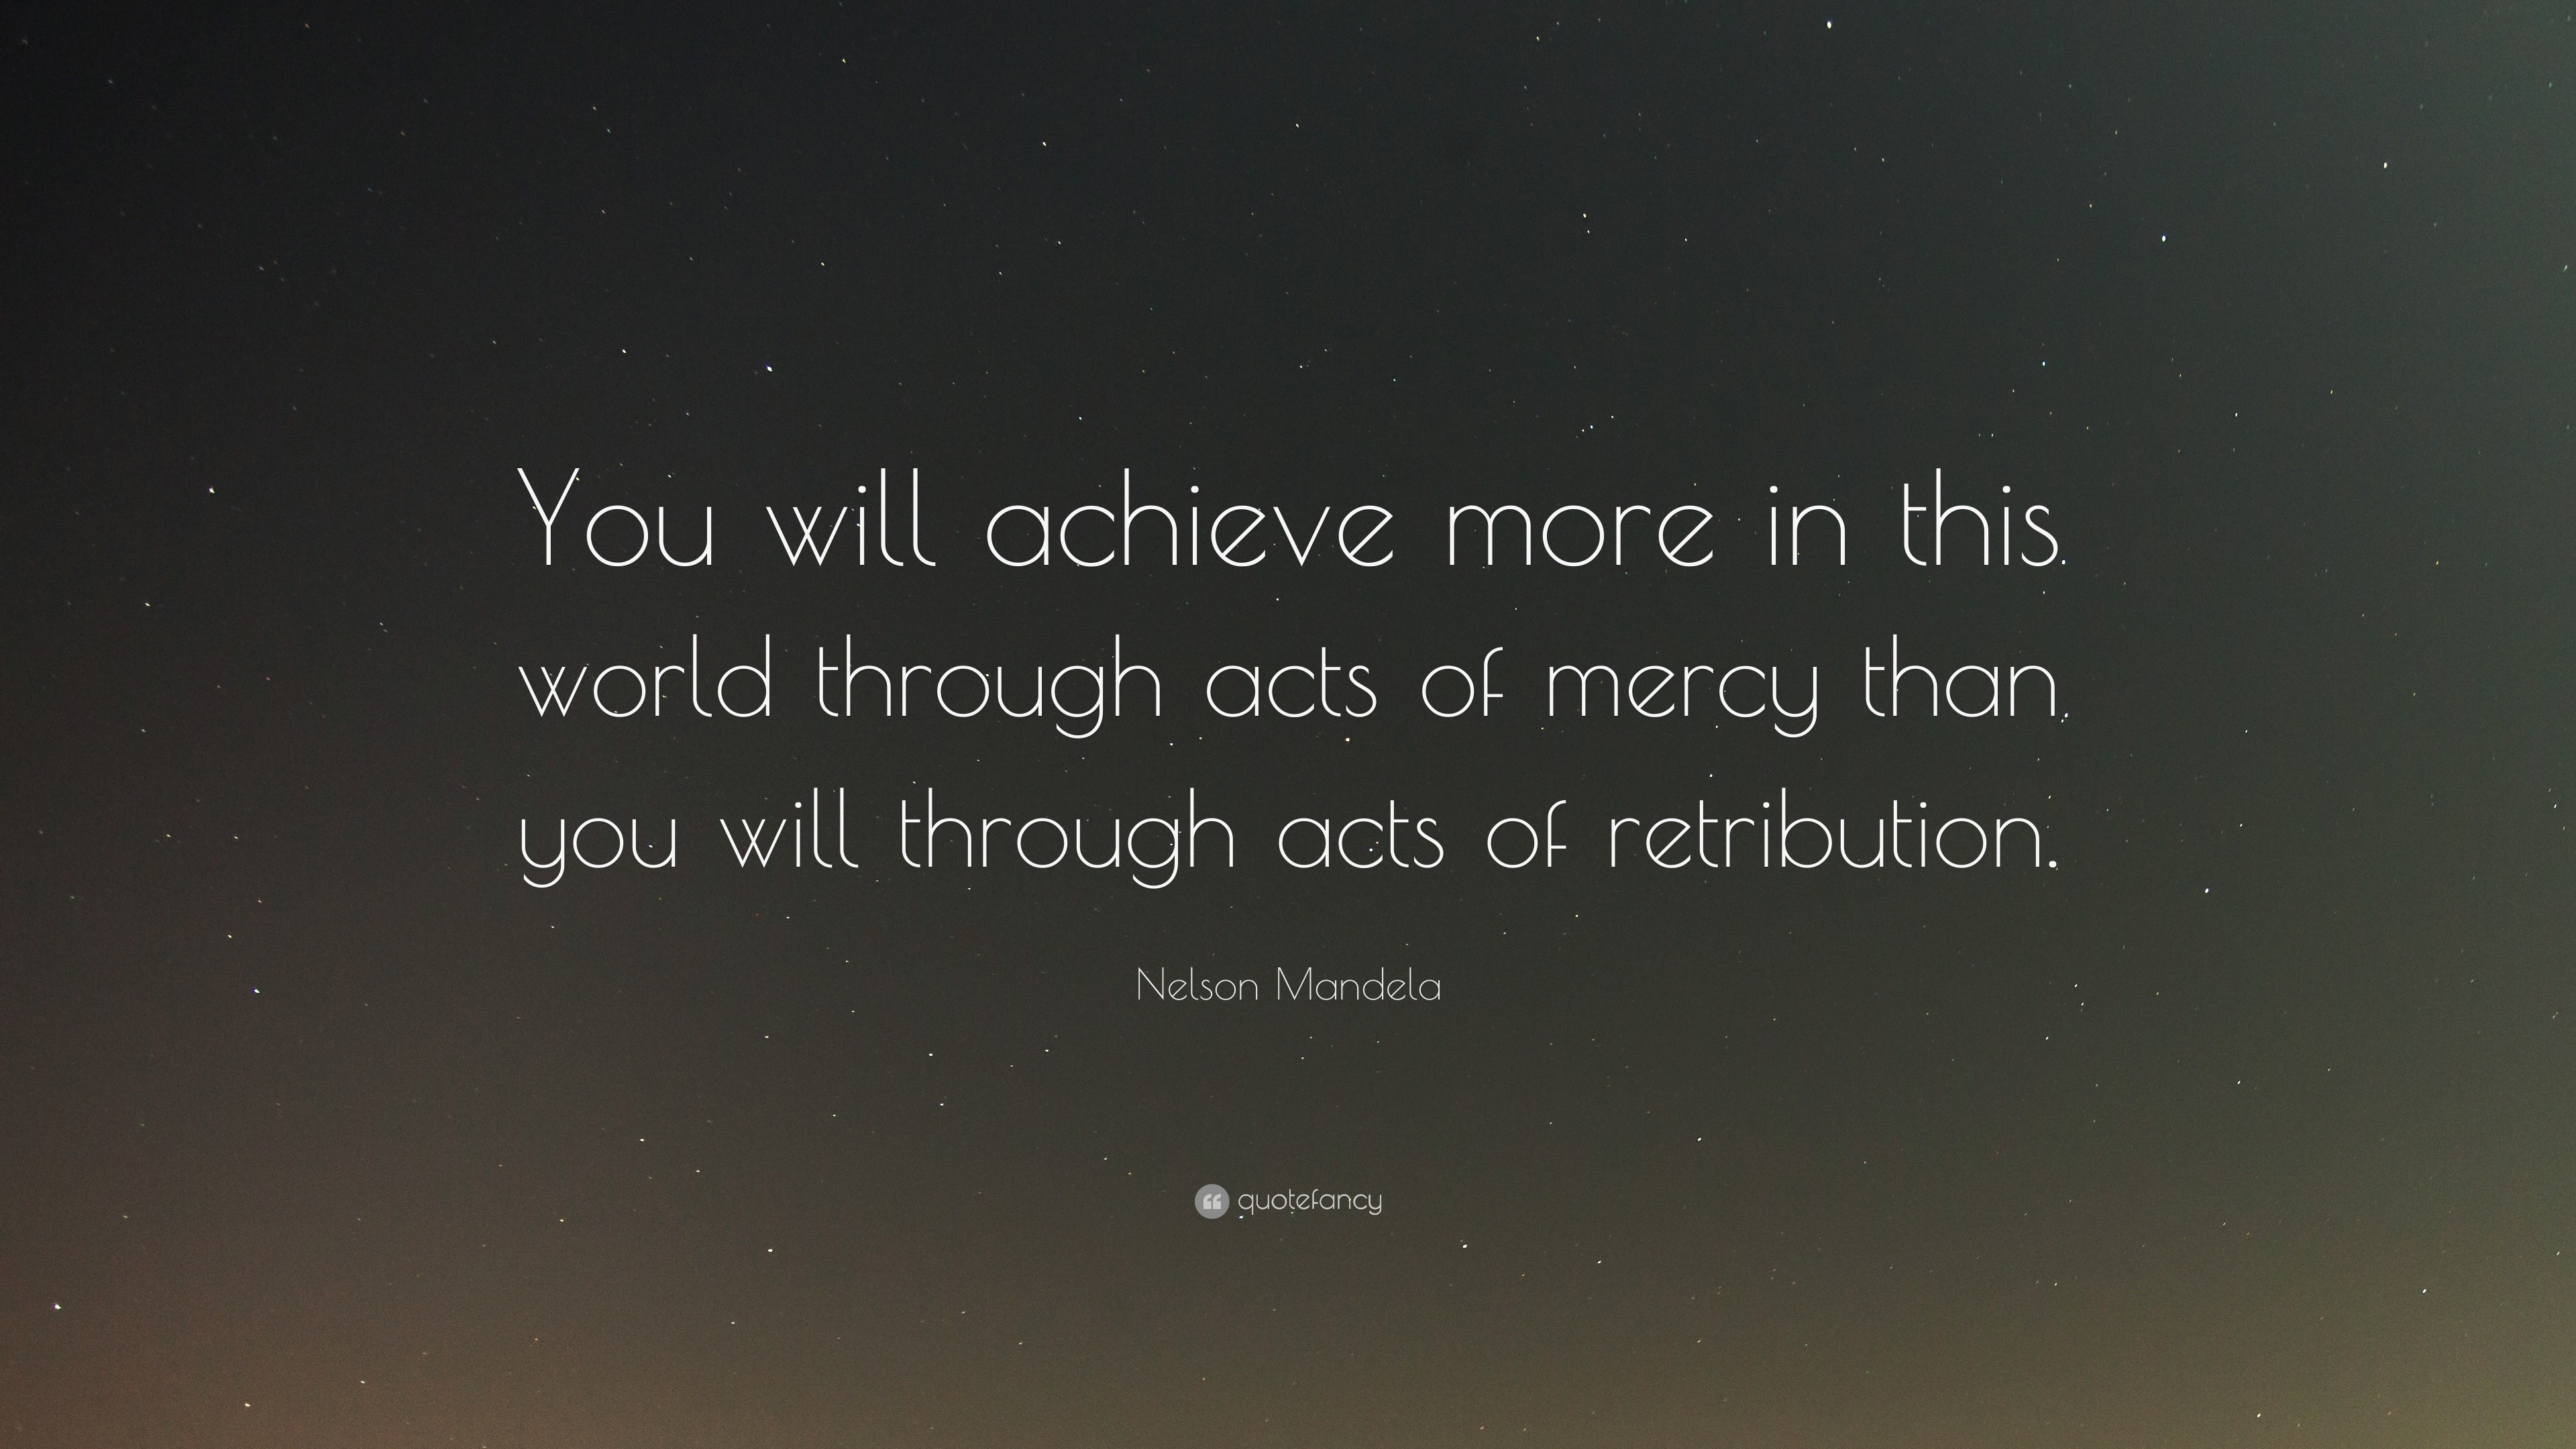 Nelson Mandela Quote: “You will achieve more in this world through acts of  mercy than you